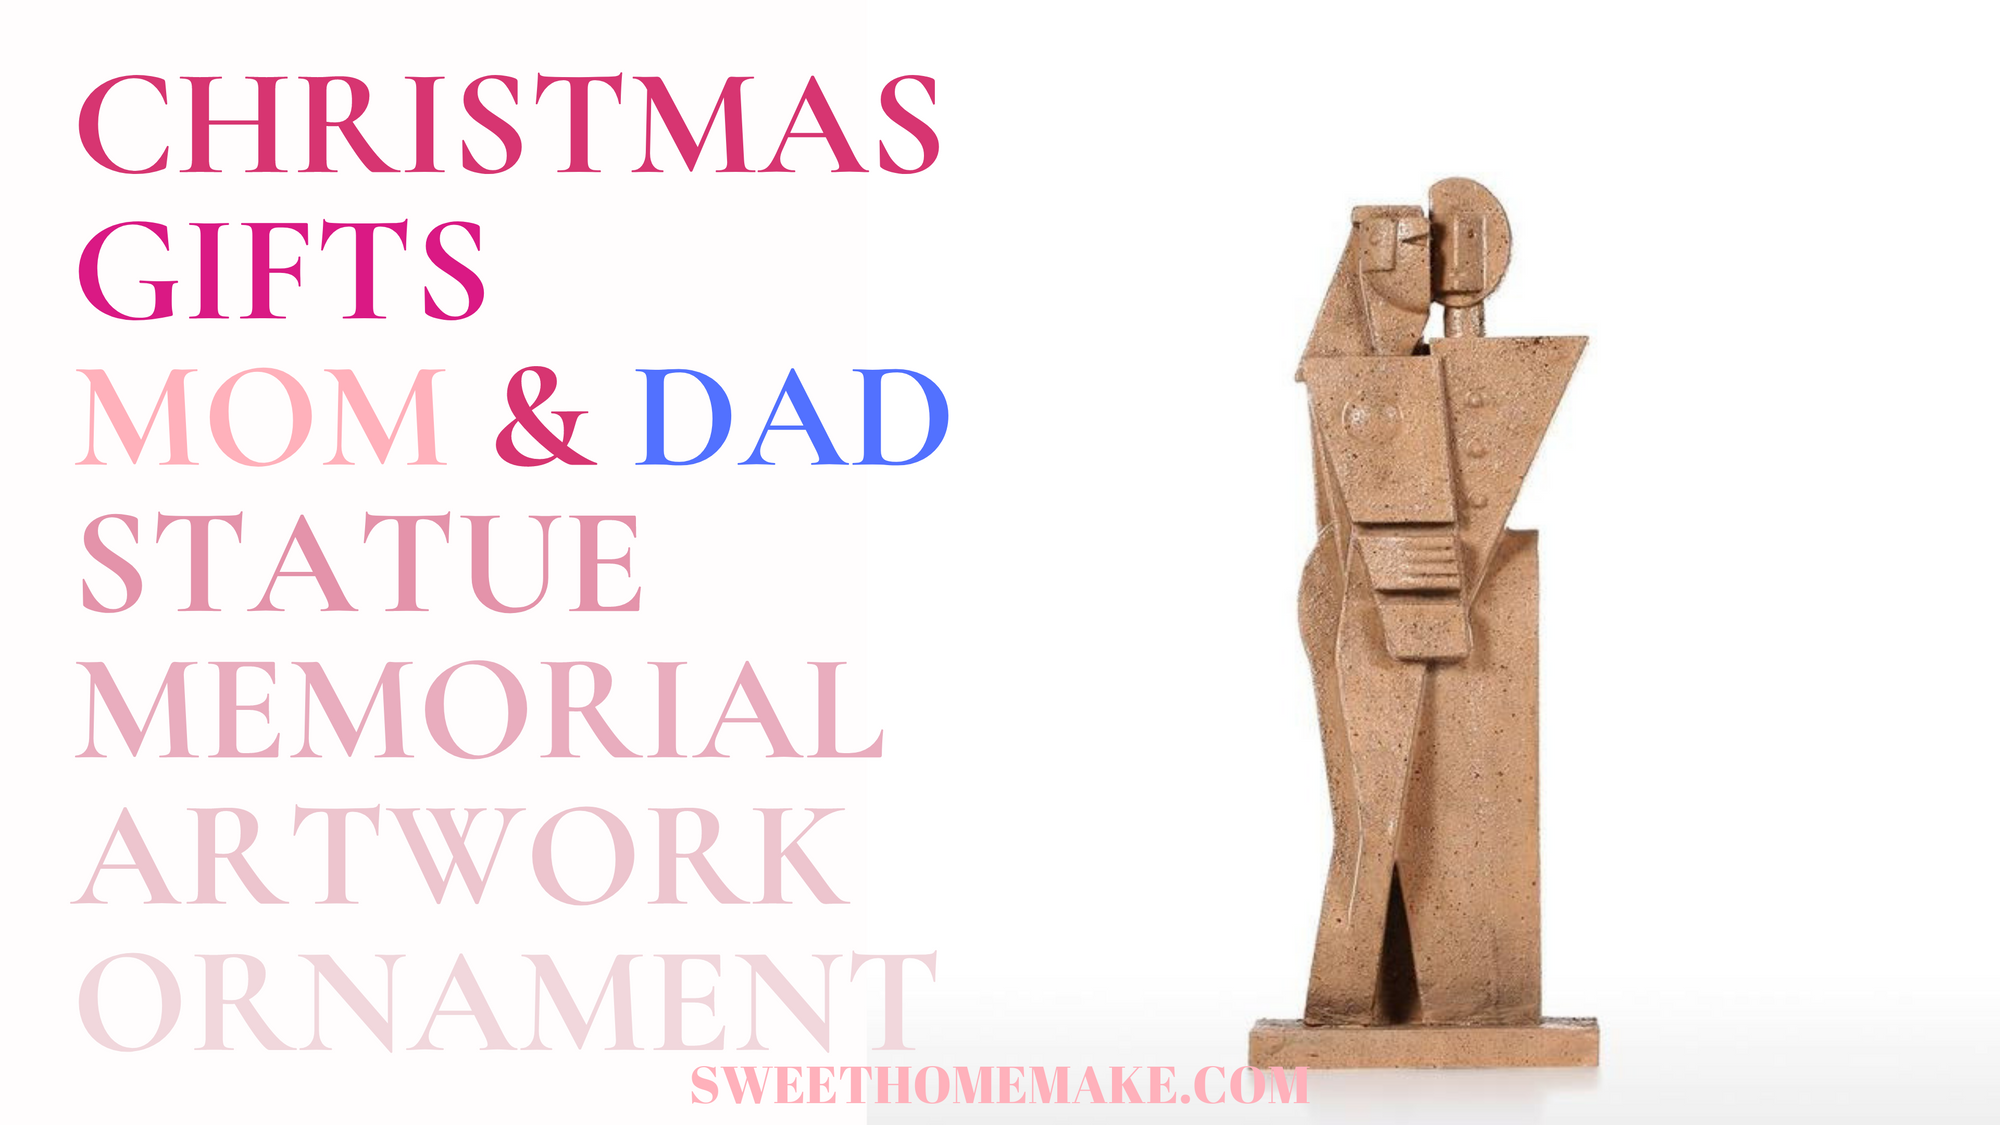 Christmas Gifts for Mom and Dad 2019 Ornaments and Couple Statue